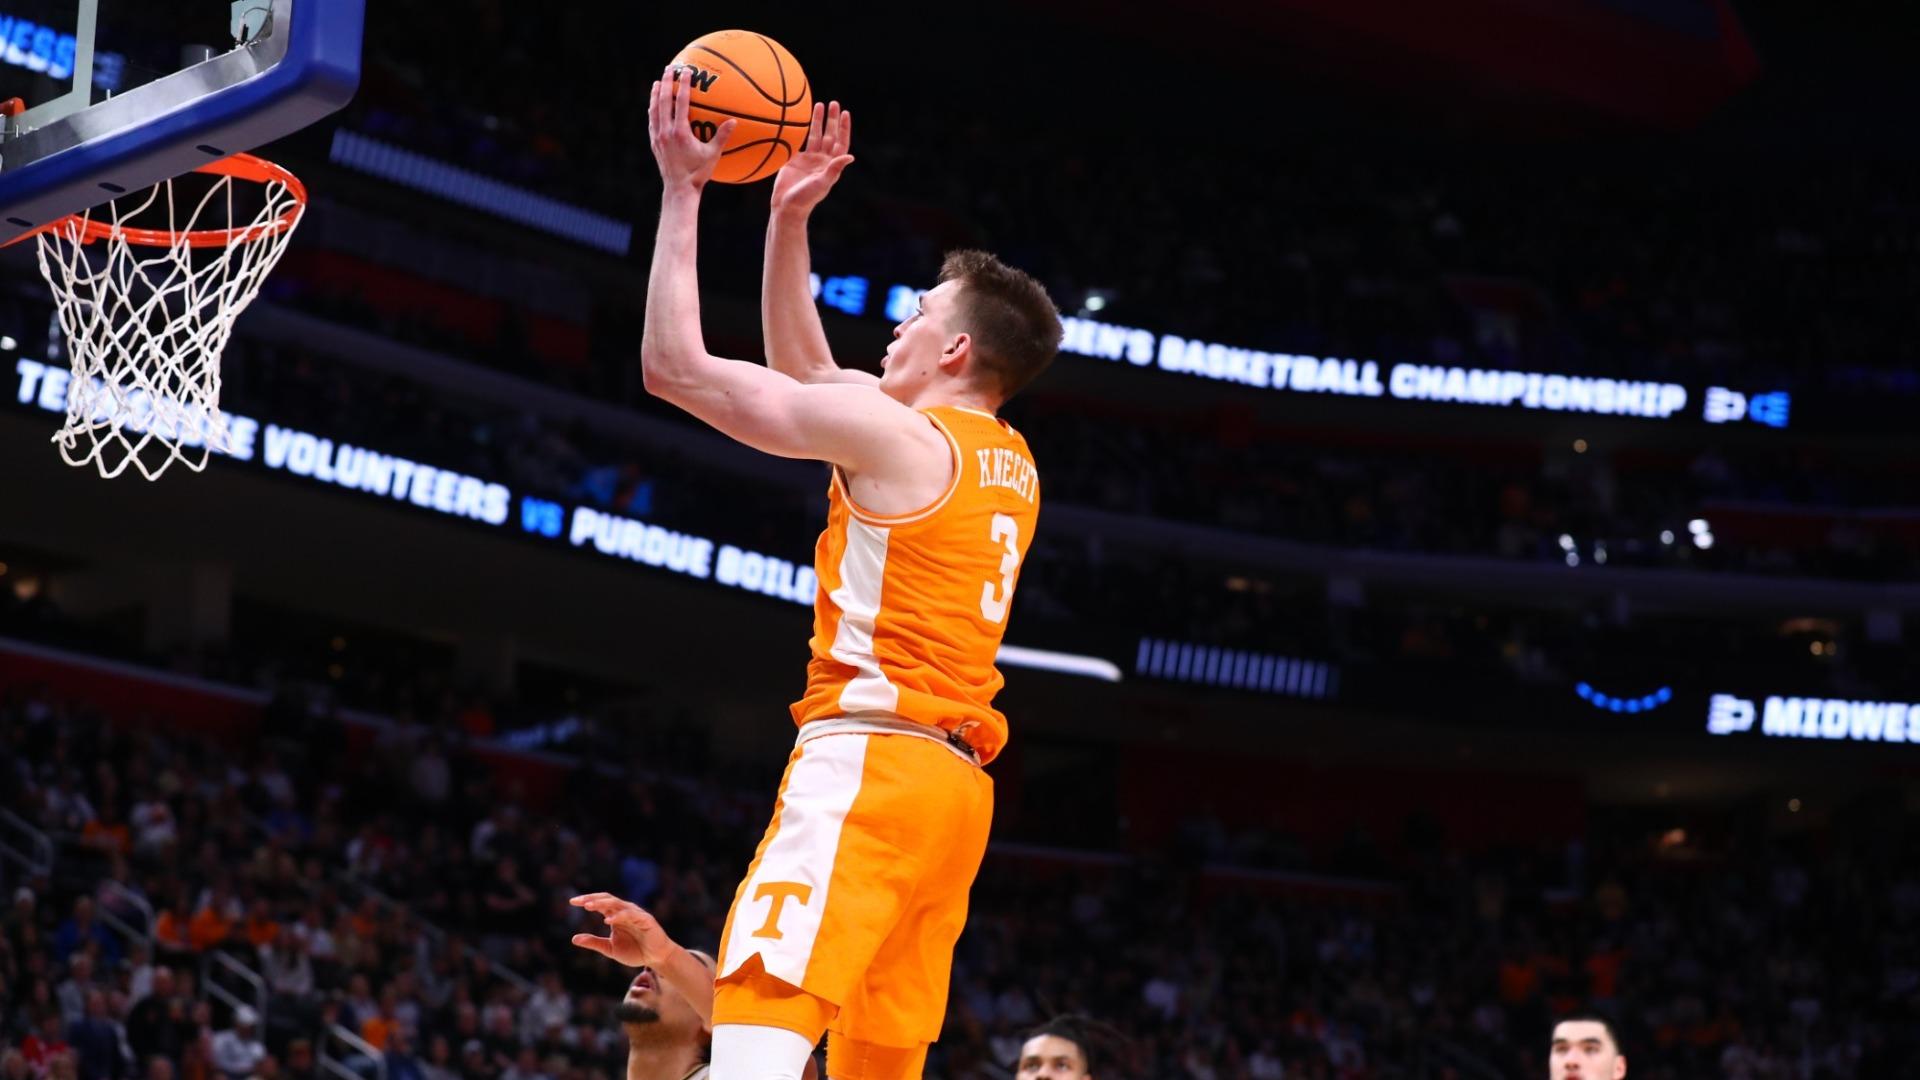 Vols Fall to Top-Seeded Purdue, 72-66, in Elite Eight